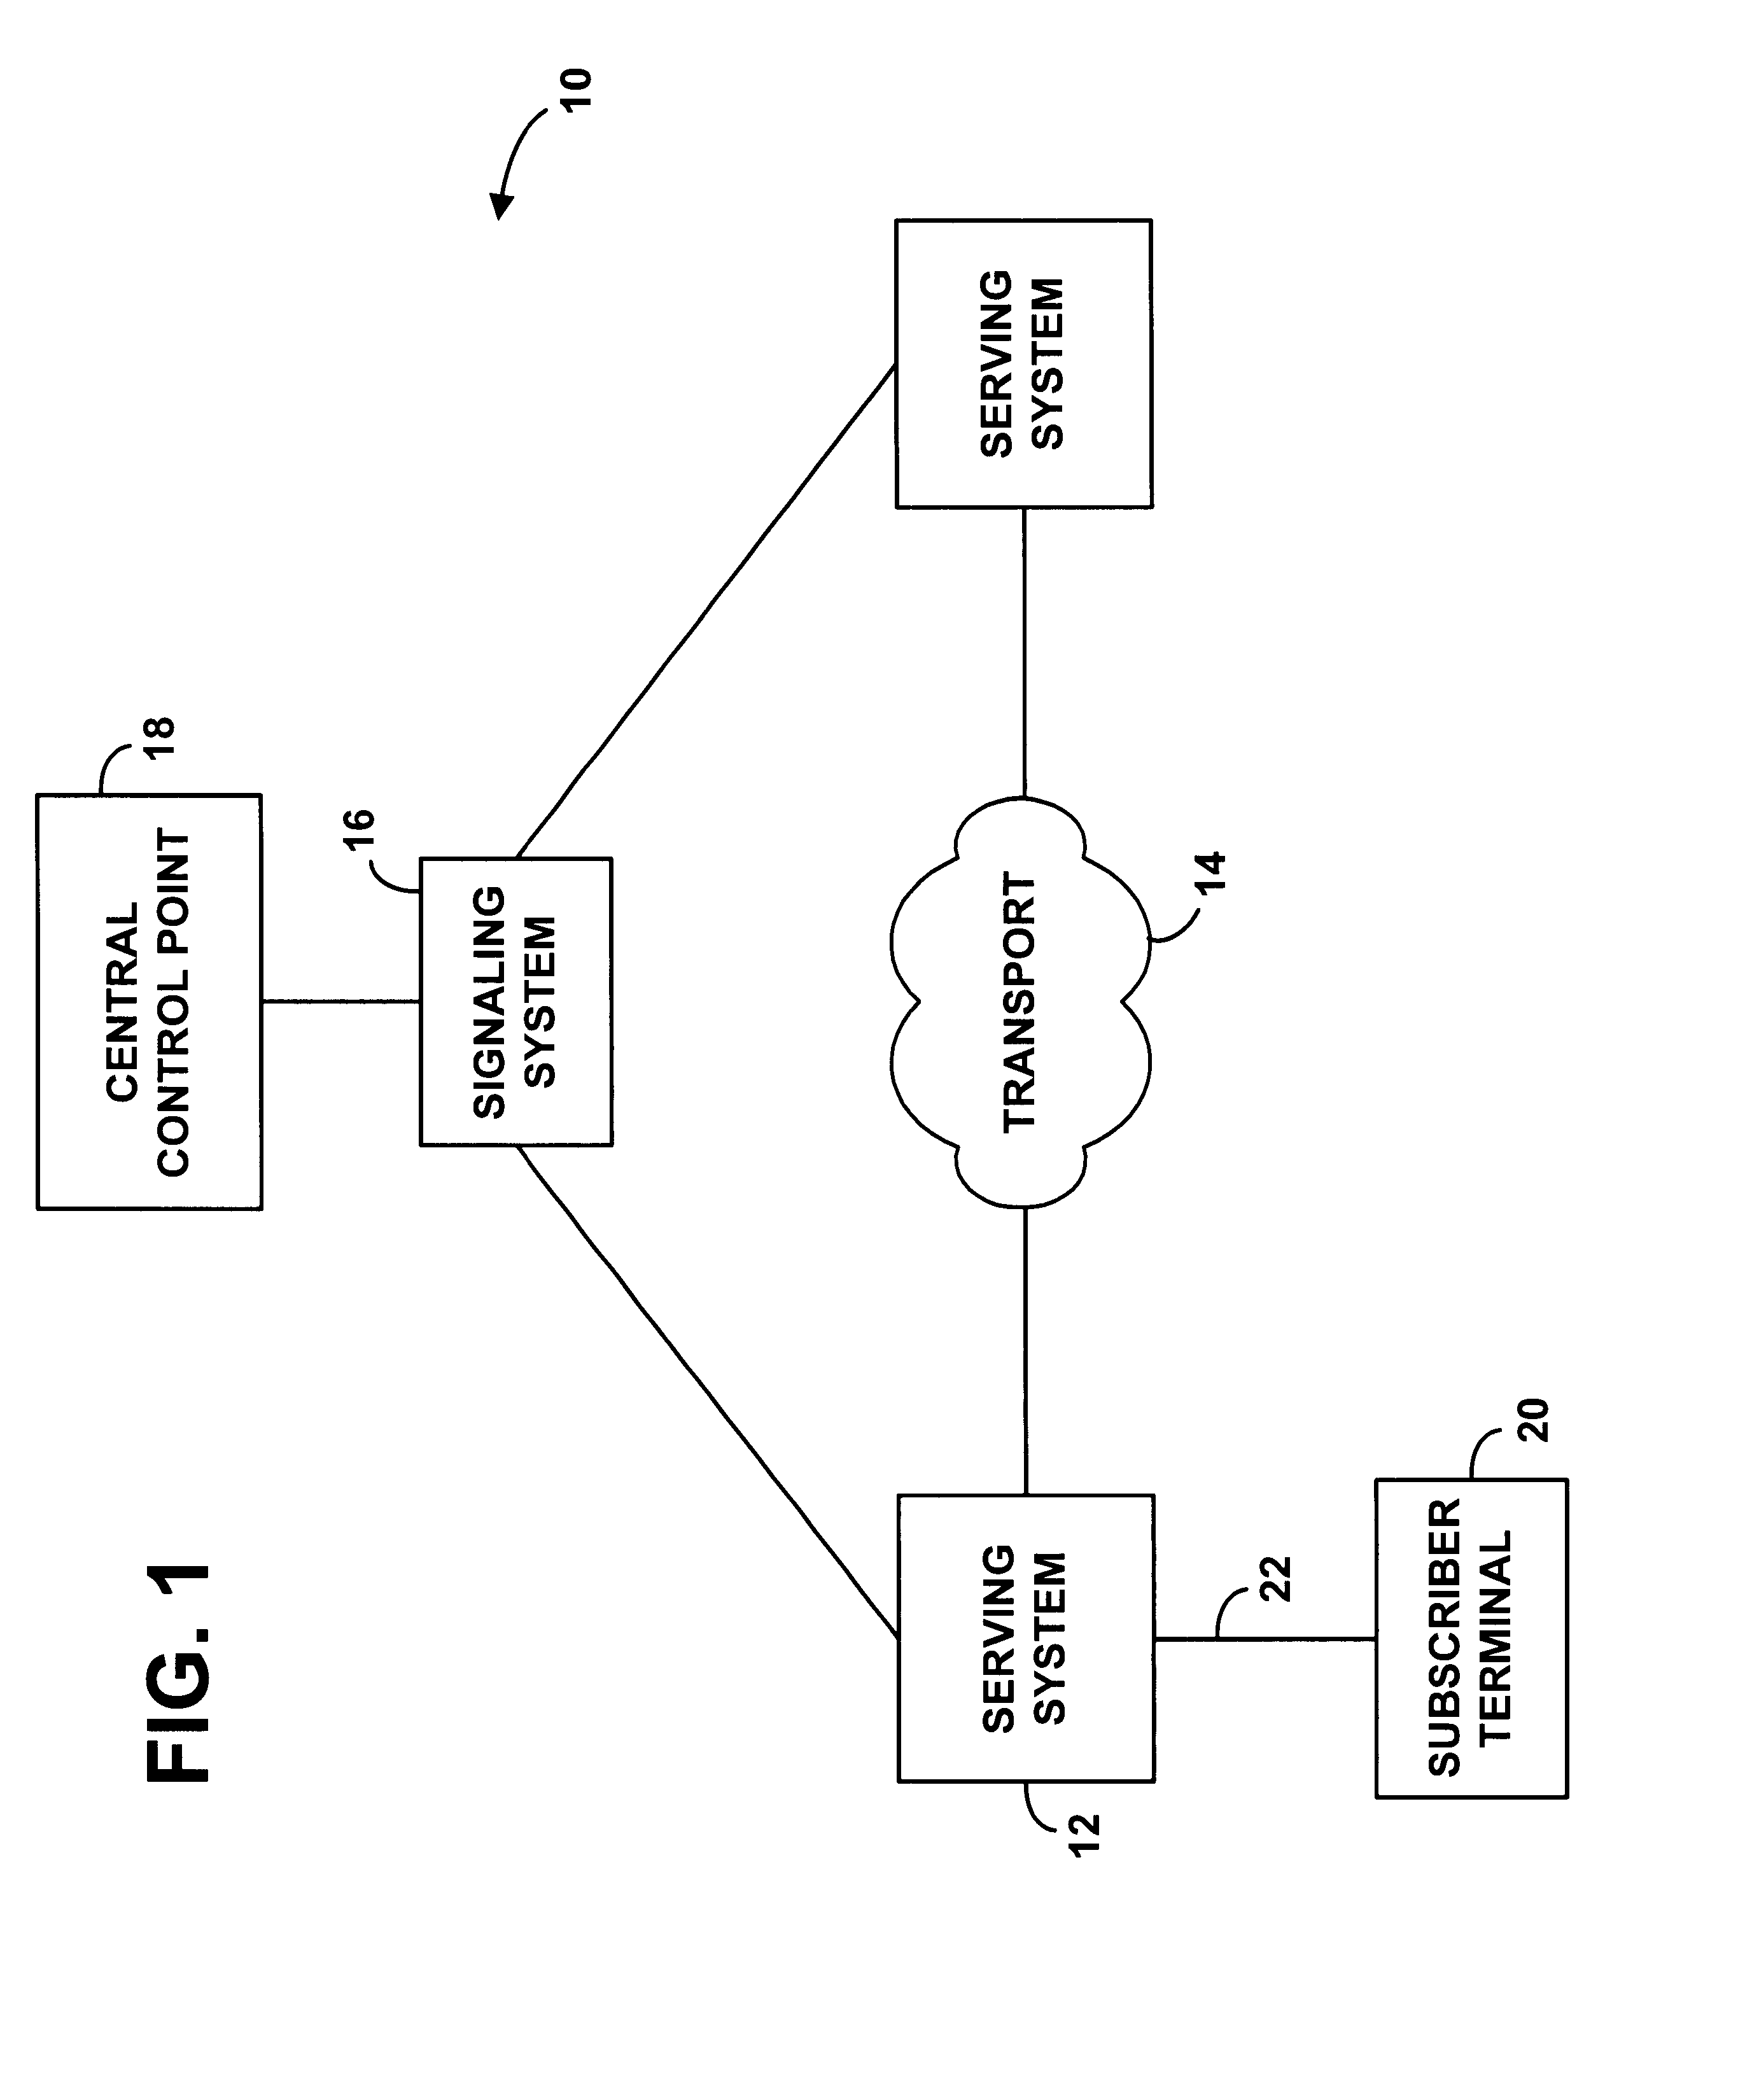 System for managing telecommunications services through use of customized profile management codes